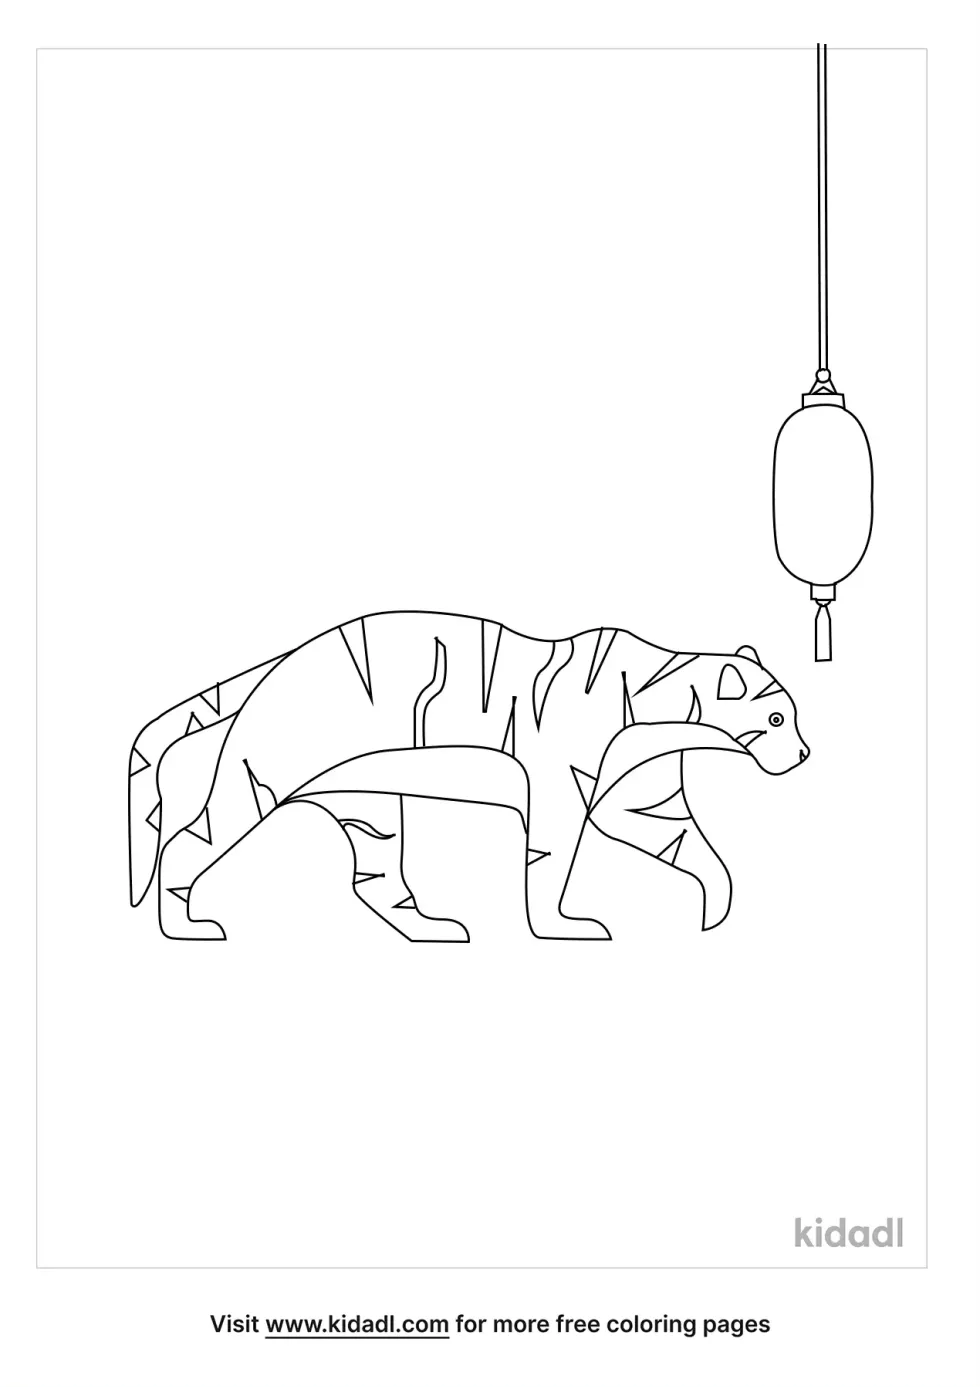 Year Of The Tiger Coloring Page